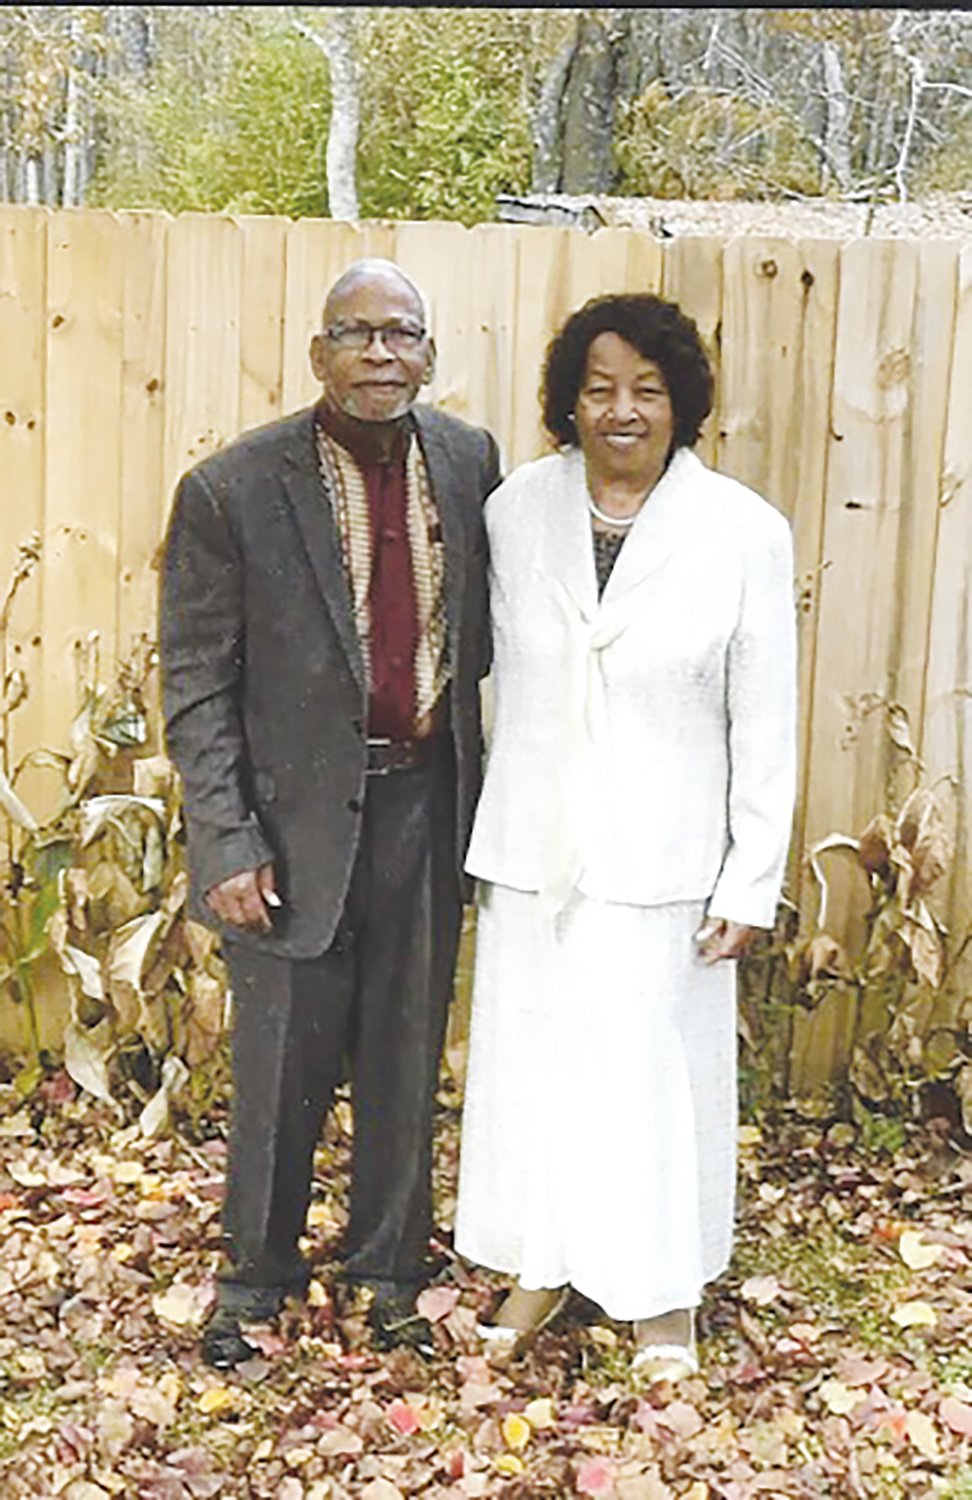 PASTOR AND FIRST LADY HANDSOM